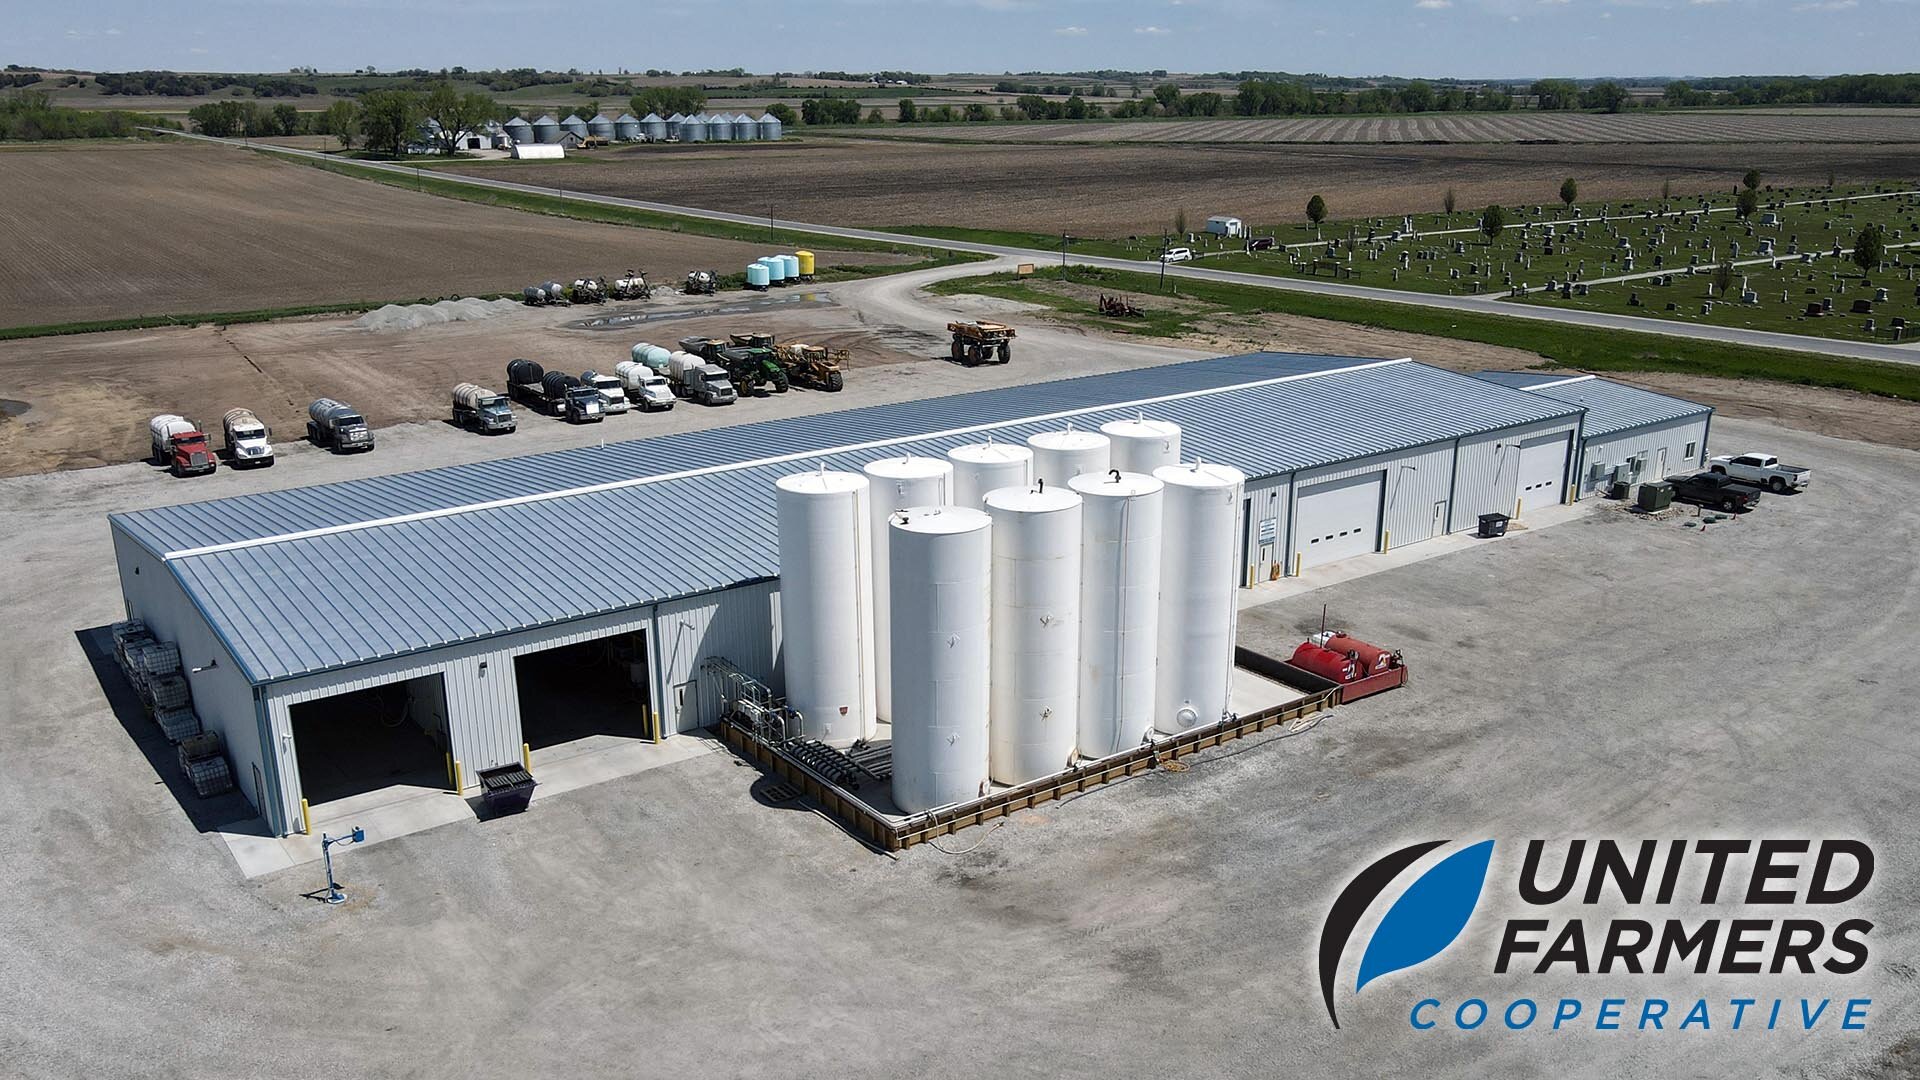  The United Farmers Cooperative facility in Farragut, IA, features two bays for fertilizer and chemical loadout, plus 24/7 unstaffed dispensing. 